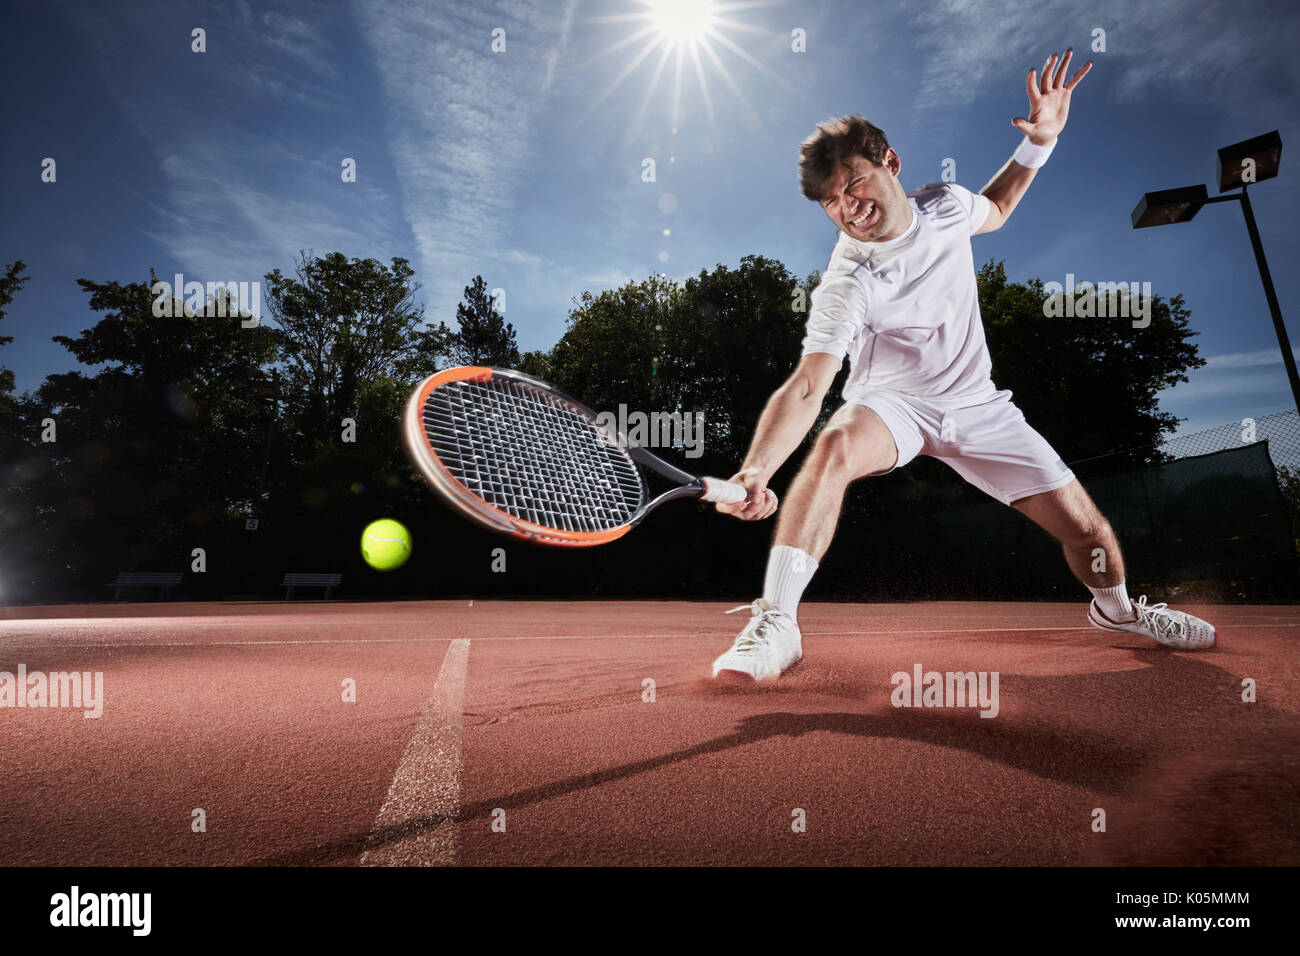 Young man playing tennis, reaching with tennis racket on clay court Stock Photo